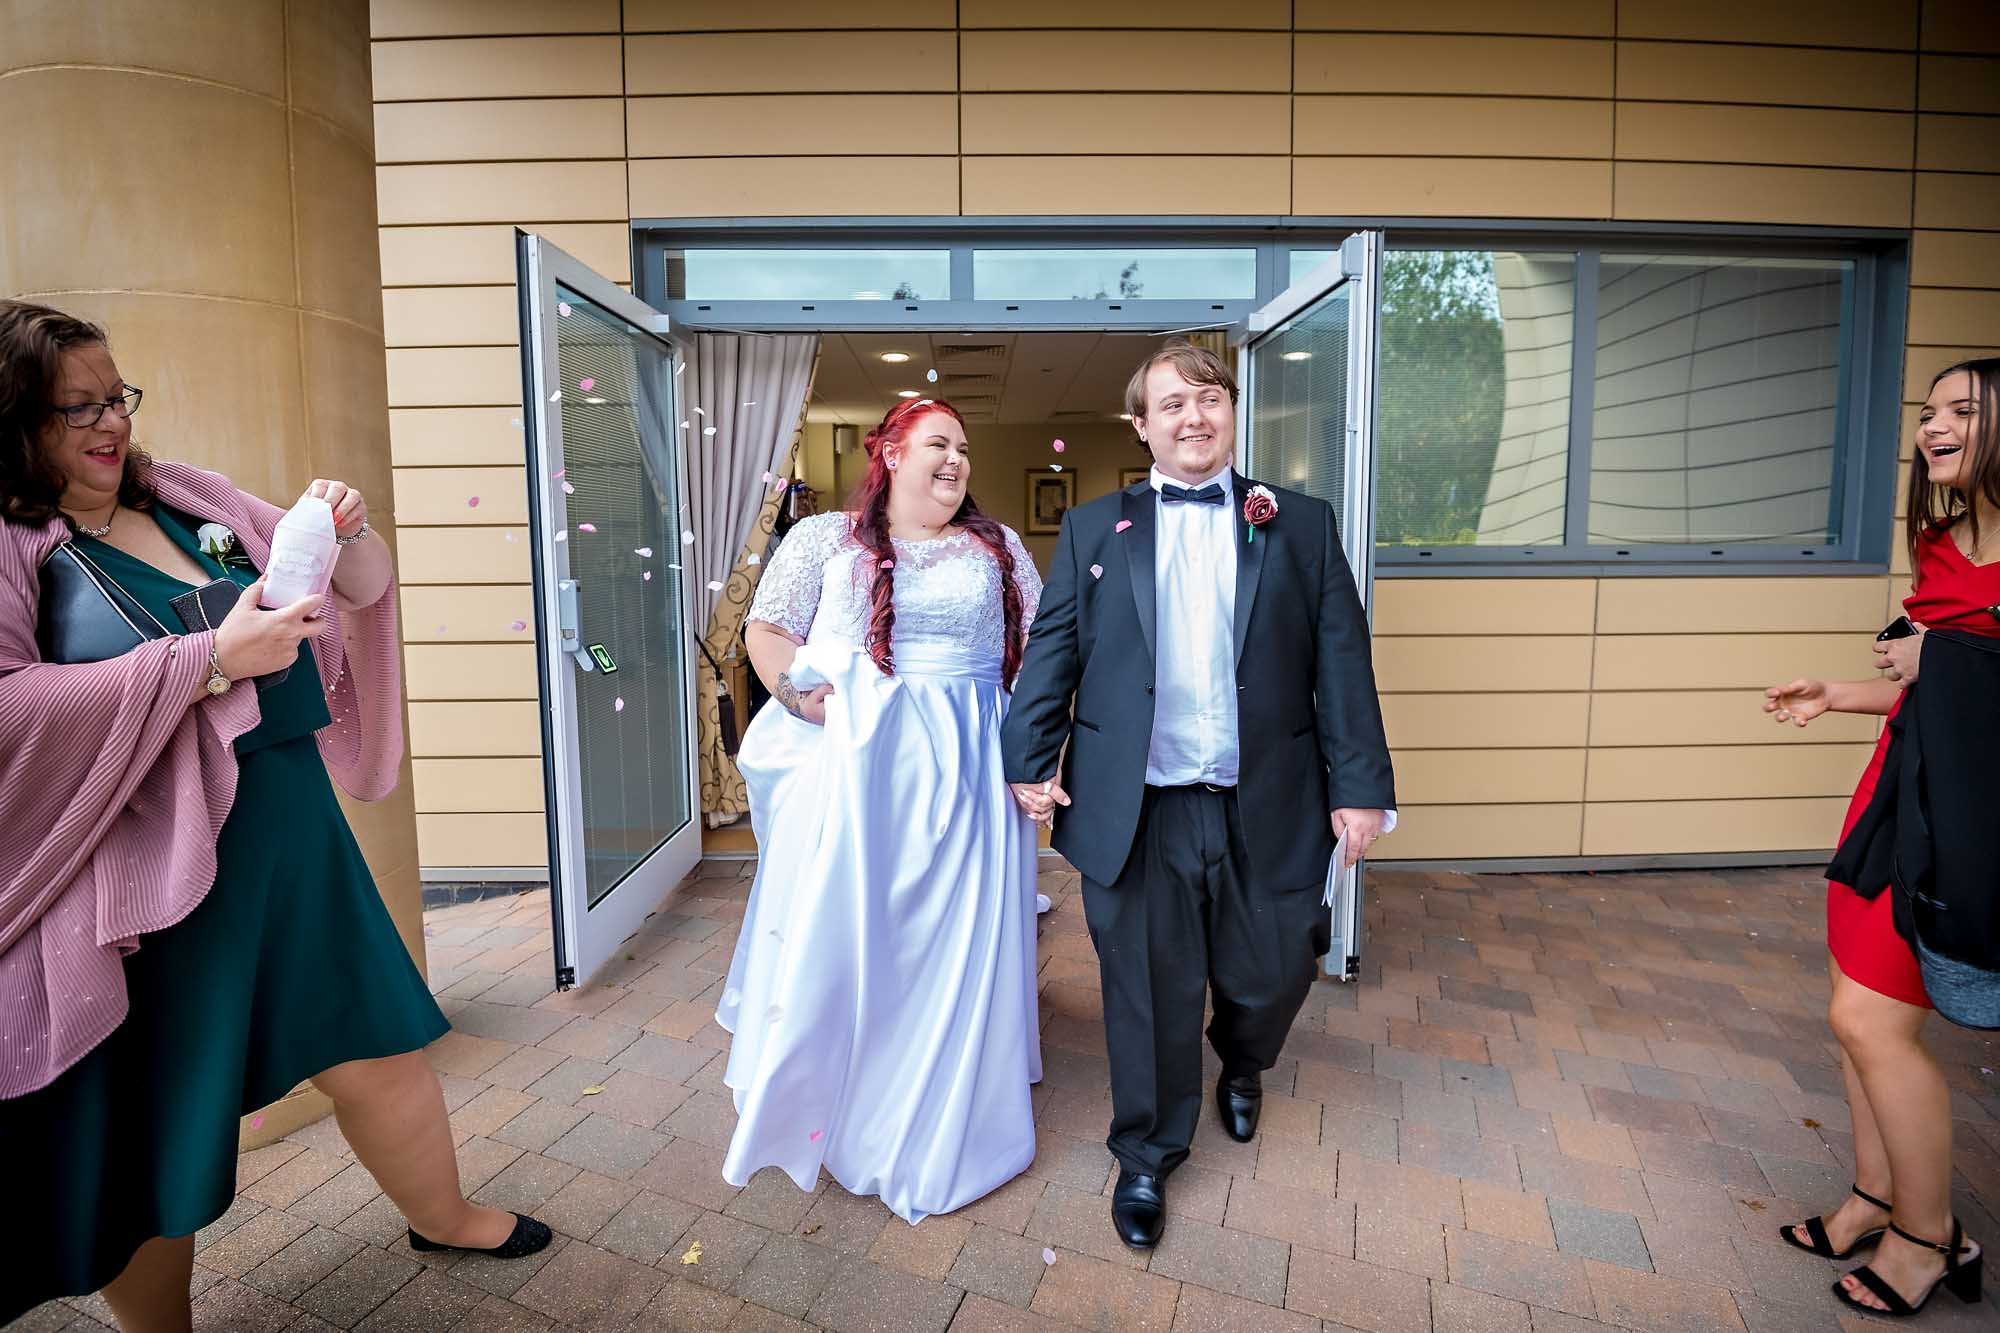 The newly married couple leave the Ceremony Room with 2 guests throwing confetti